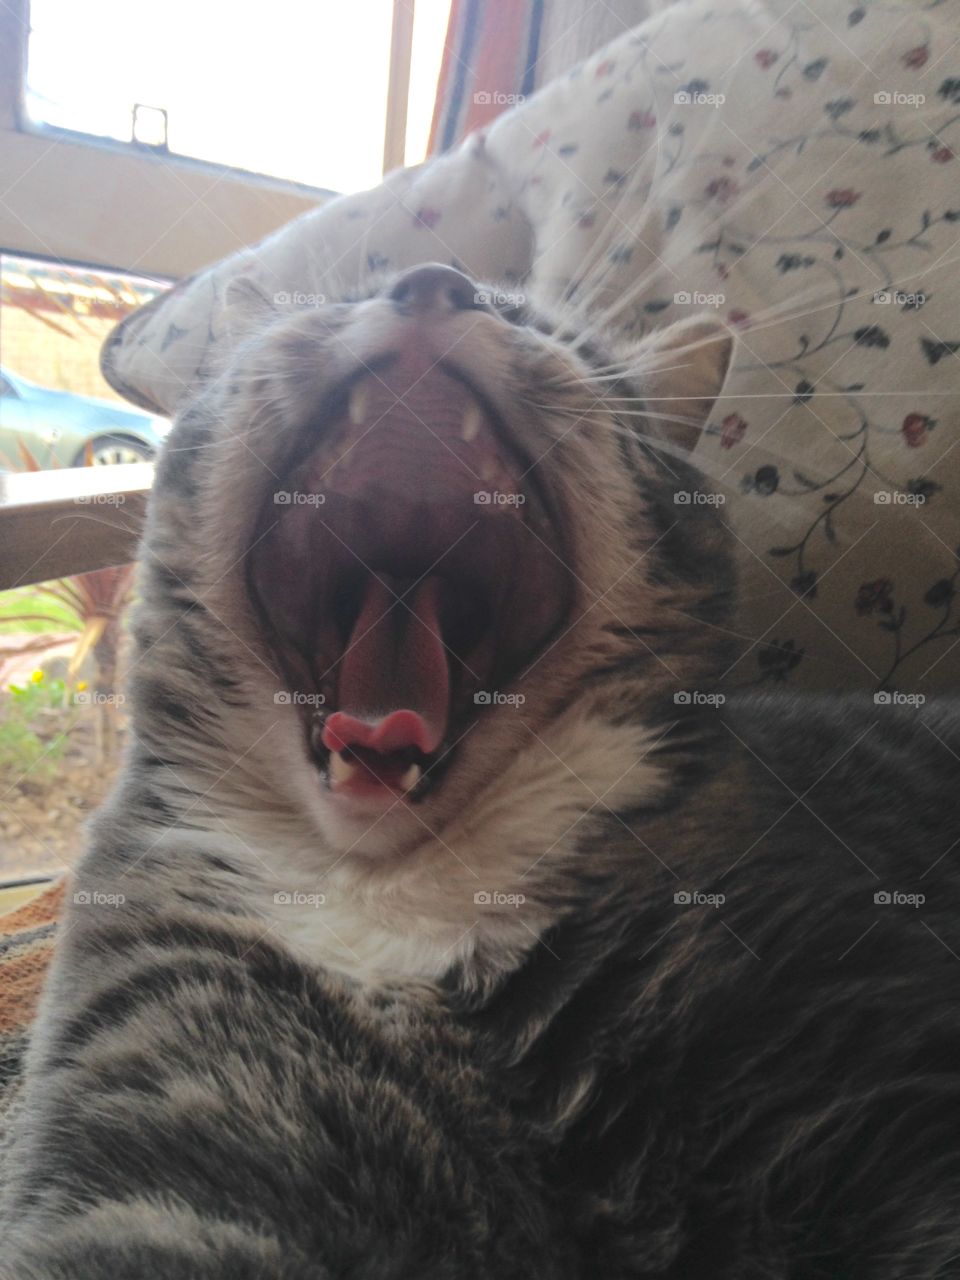 Yawning in action